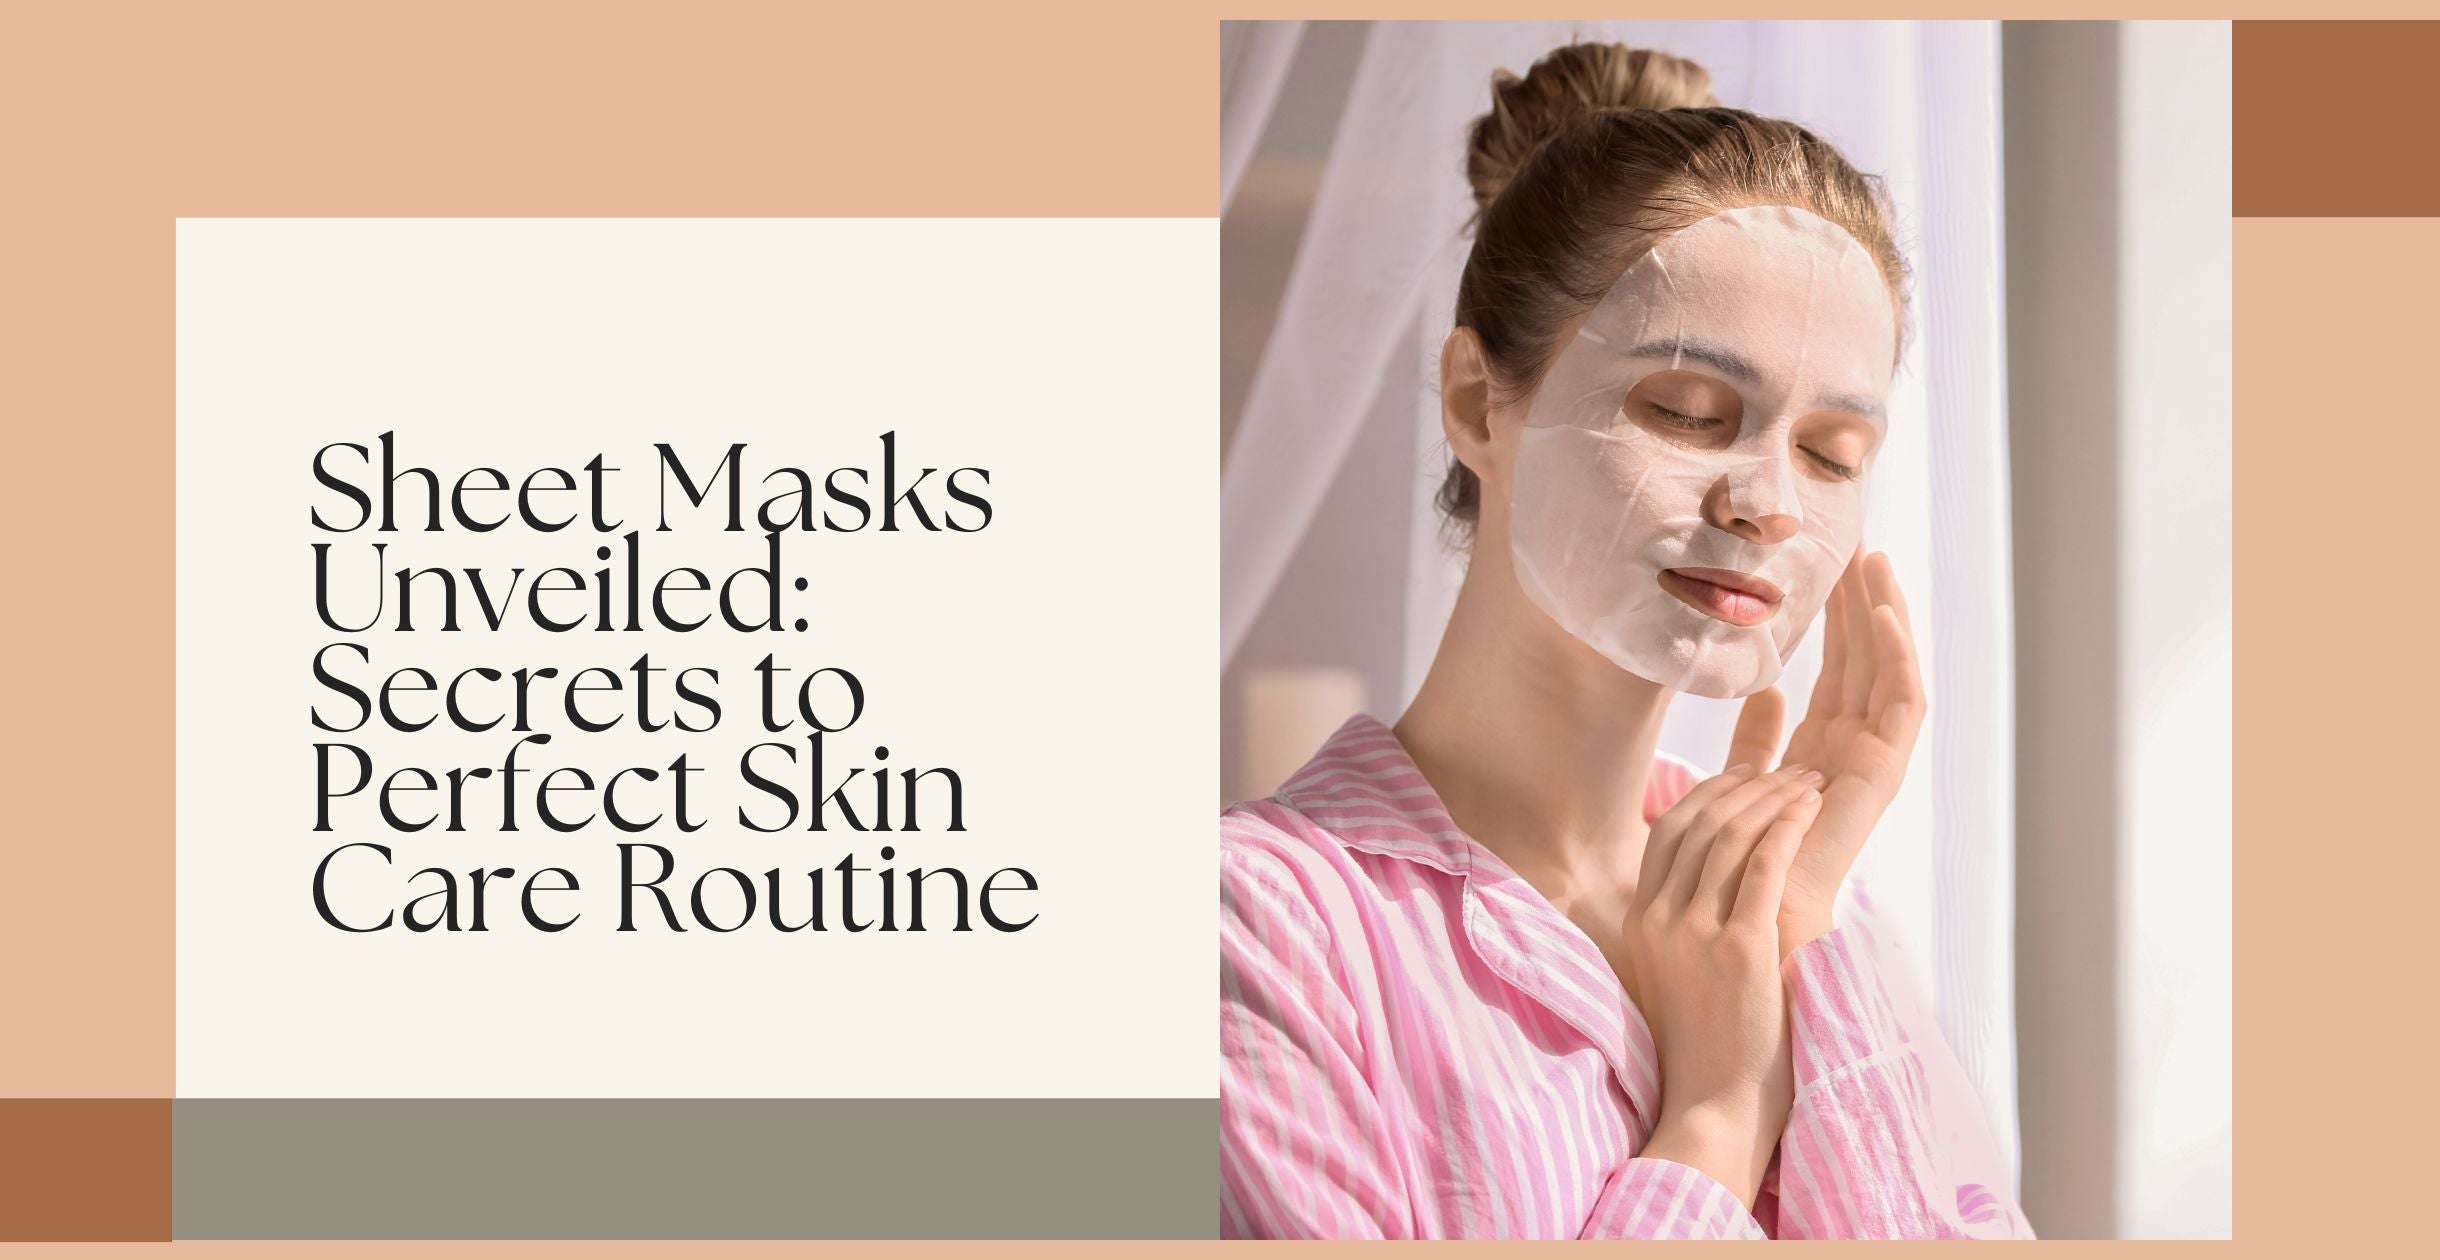 Sheet Masks Unveiled: Secrets to Perfect Skin Care Routine